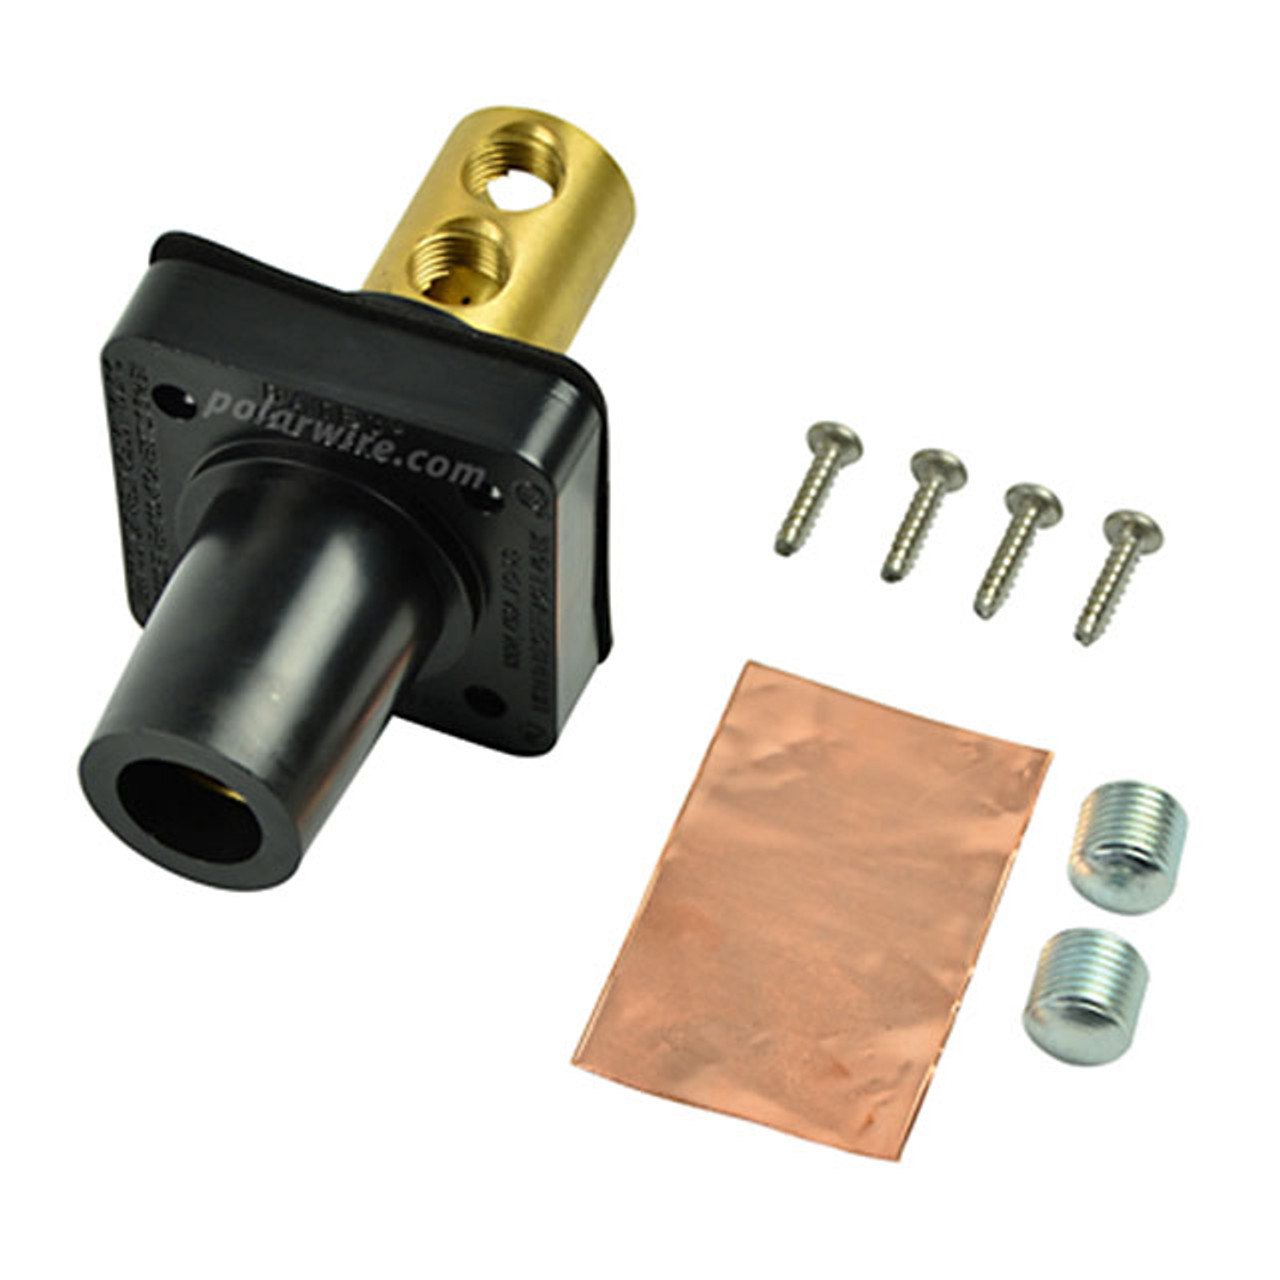 Marinco black 400A CL 16 Series male single pin panel mount cam lock connector with set screw for 2-2/0 AWG cable